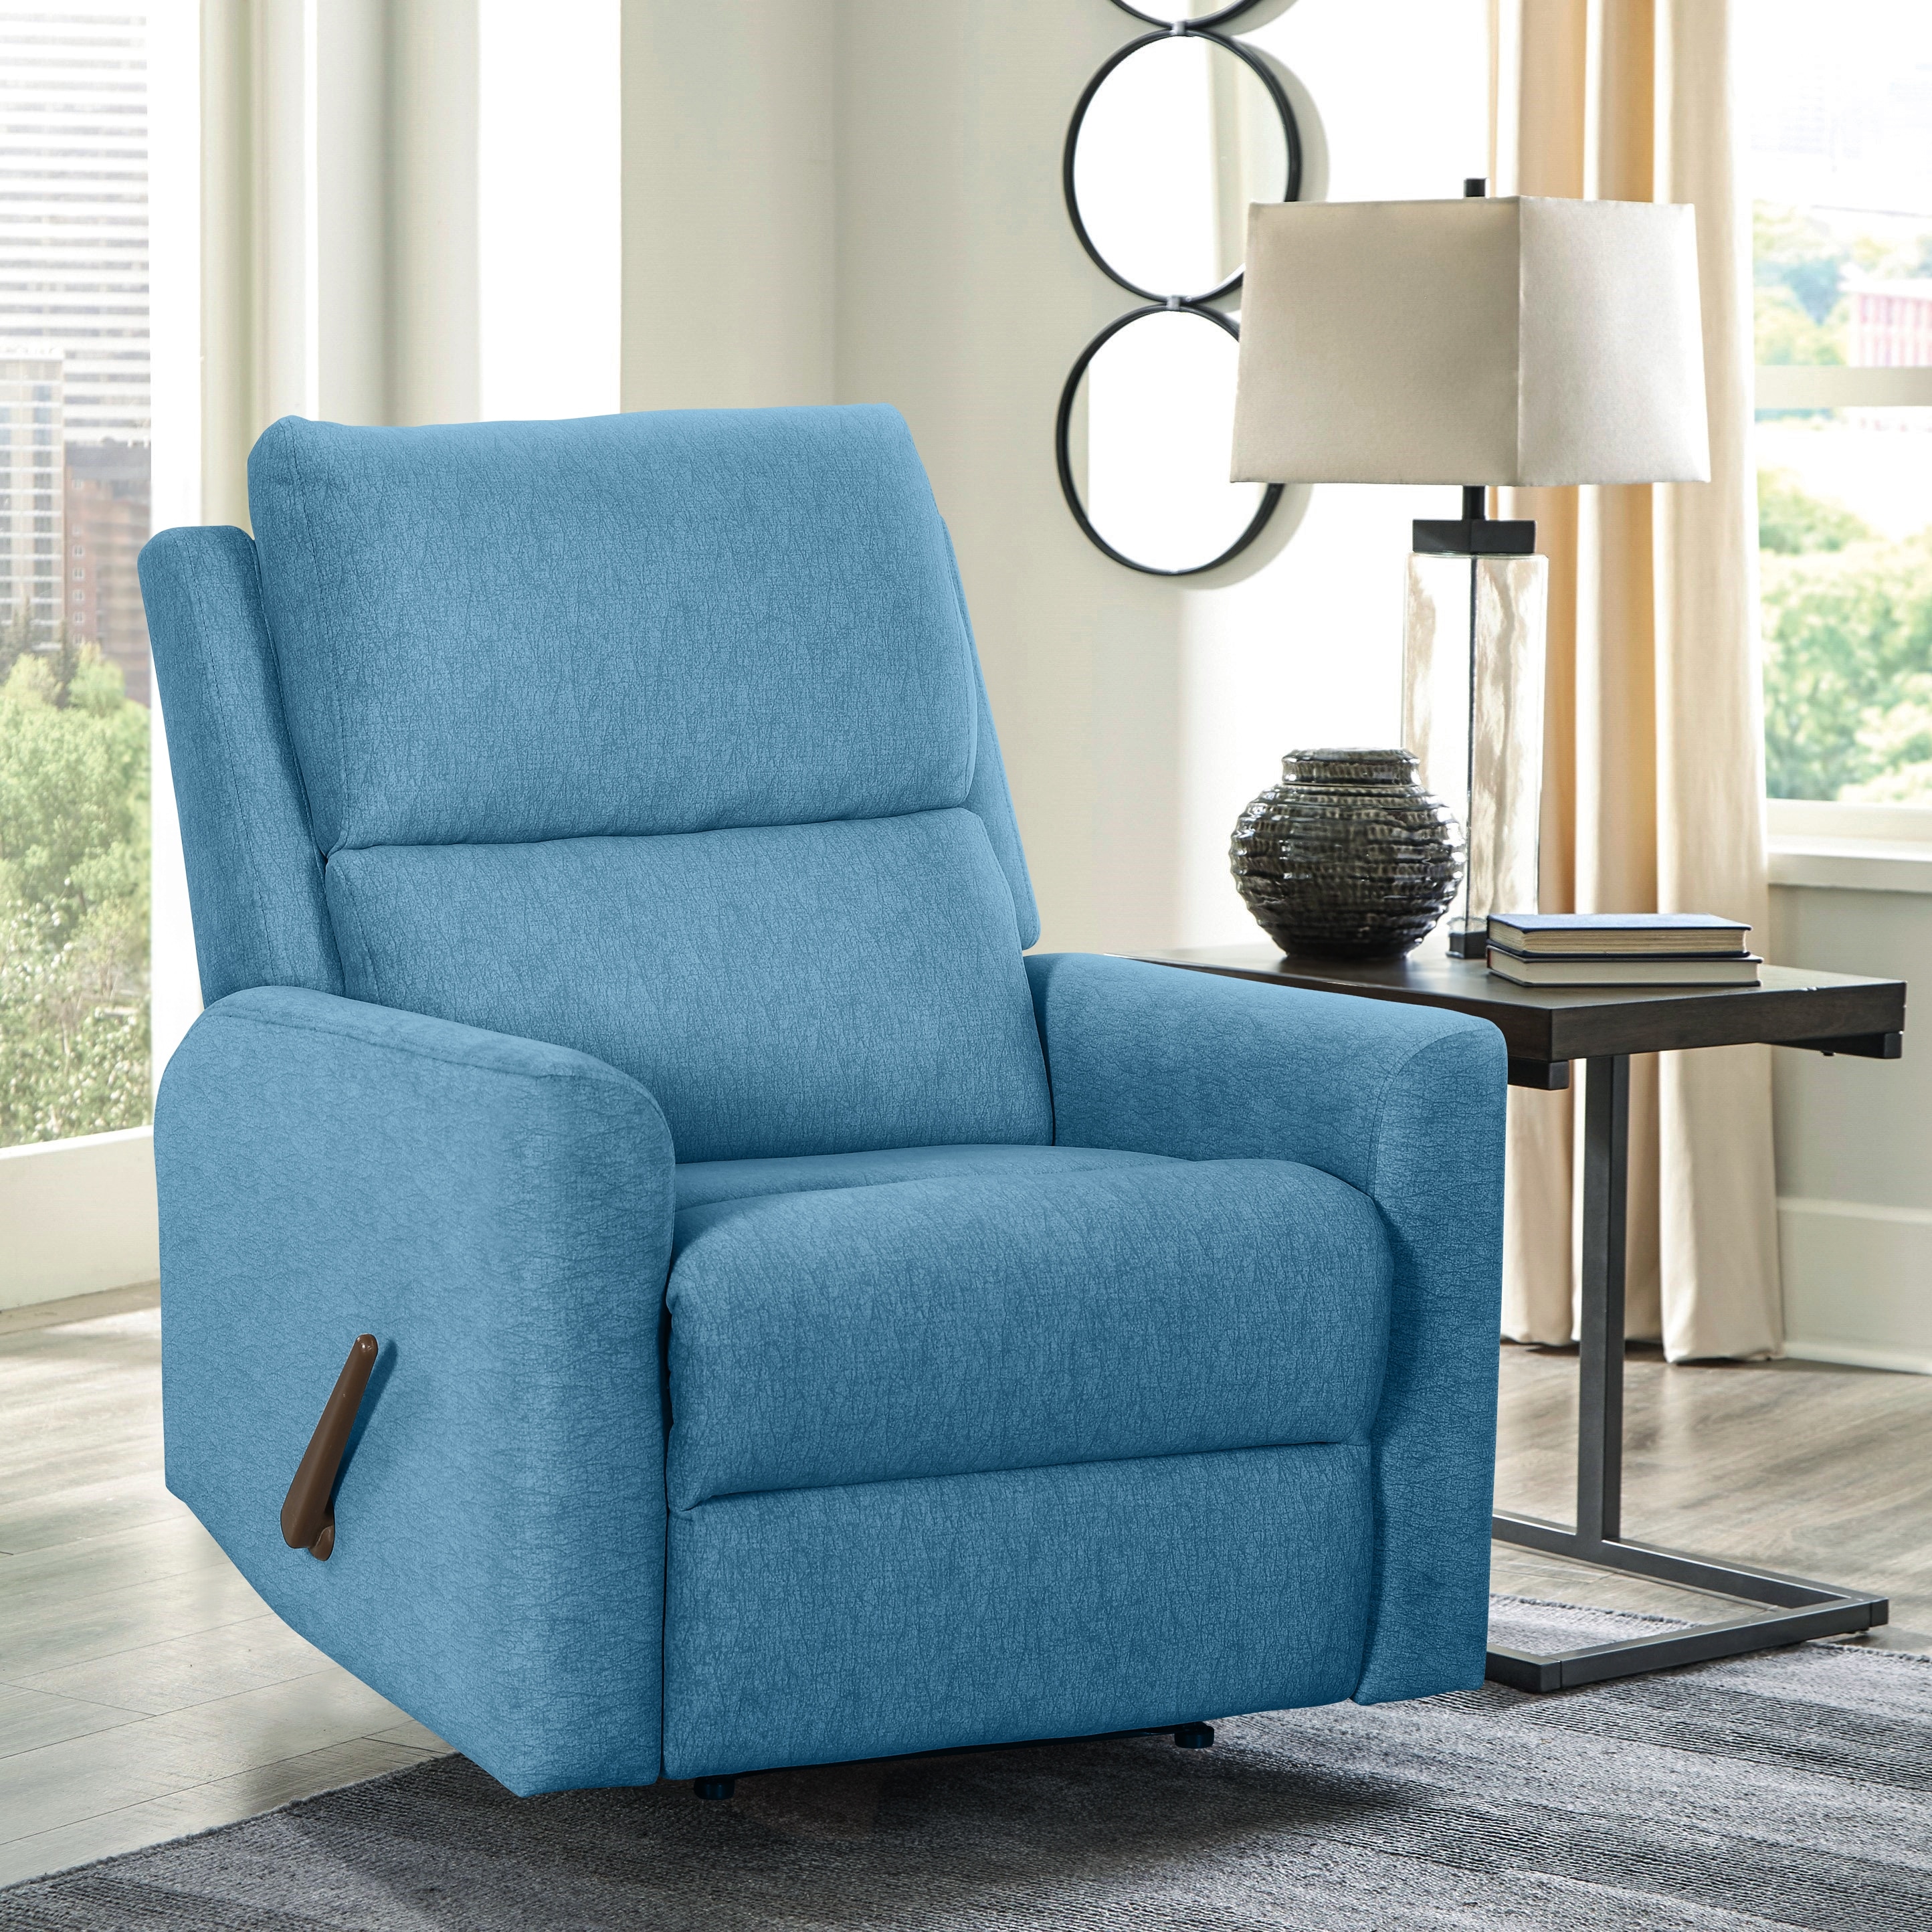 https://ak1.ostkcdn.com/images/products/is/images/direct/d9ebd90f342402693b1fcad95e962739d347778c/Moasis-Upholstered-Velvet-Fabric-Recliner-Chair.jpg